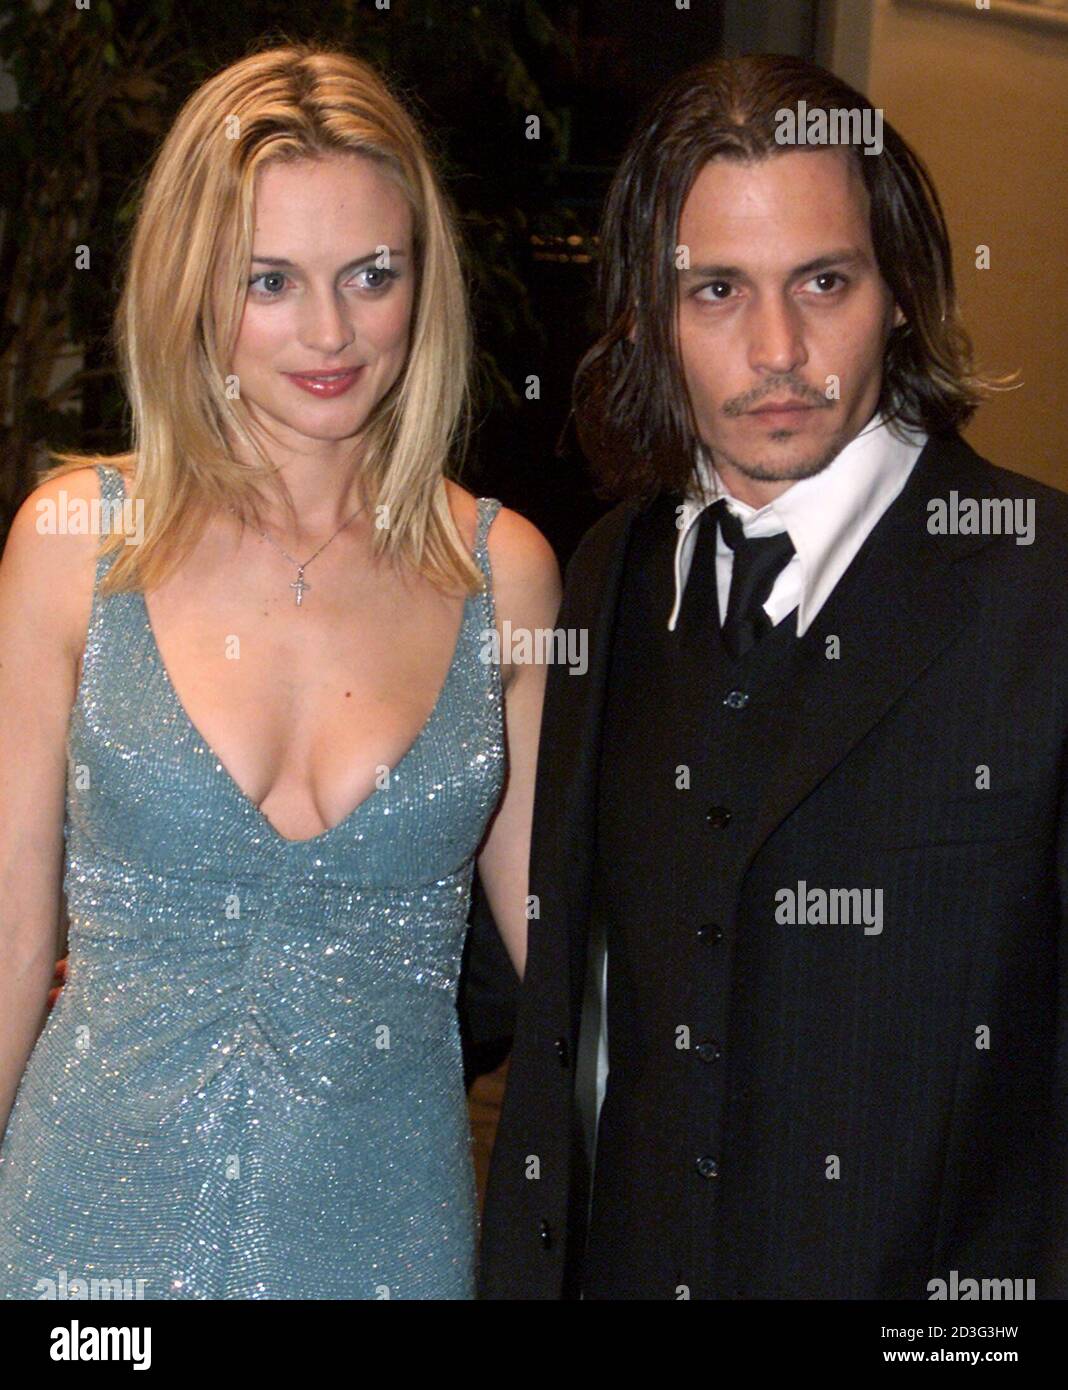 Actress Heather Graham and actor Johnny Depp, stars of the new film "From  Hell" pose at the film's premiere in Los Angeles October 17, 2001. The film  about the infamous killer Jack